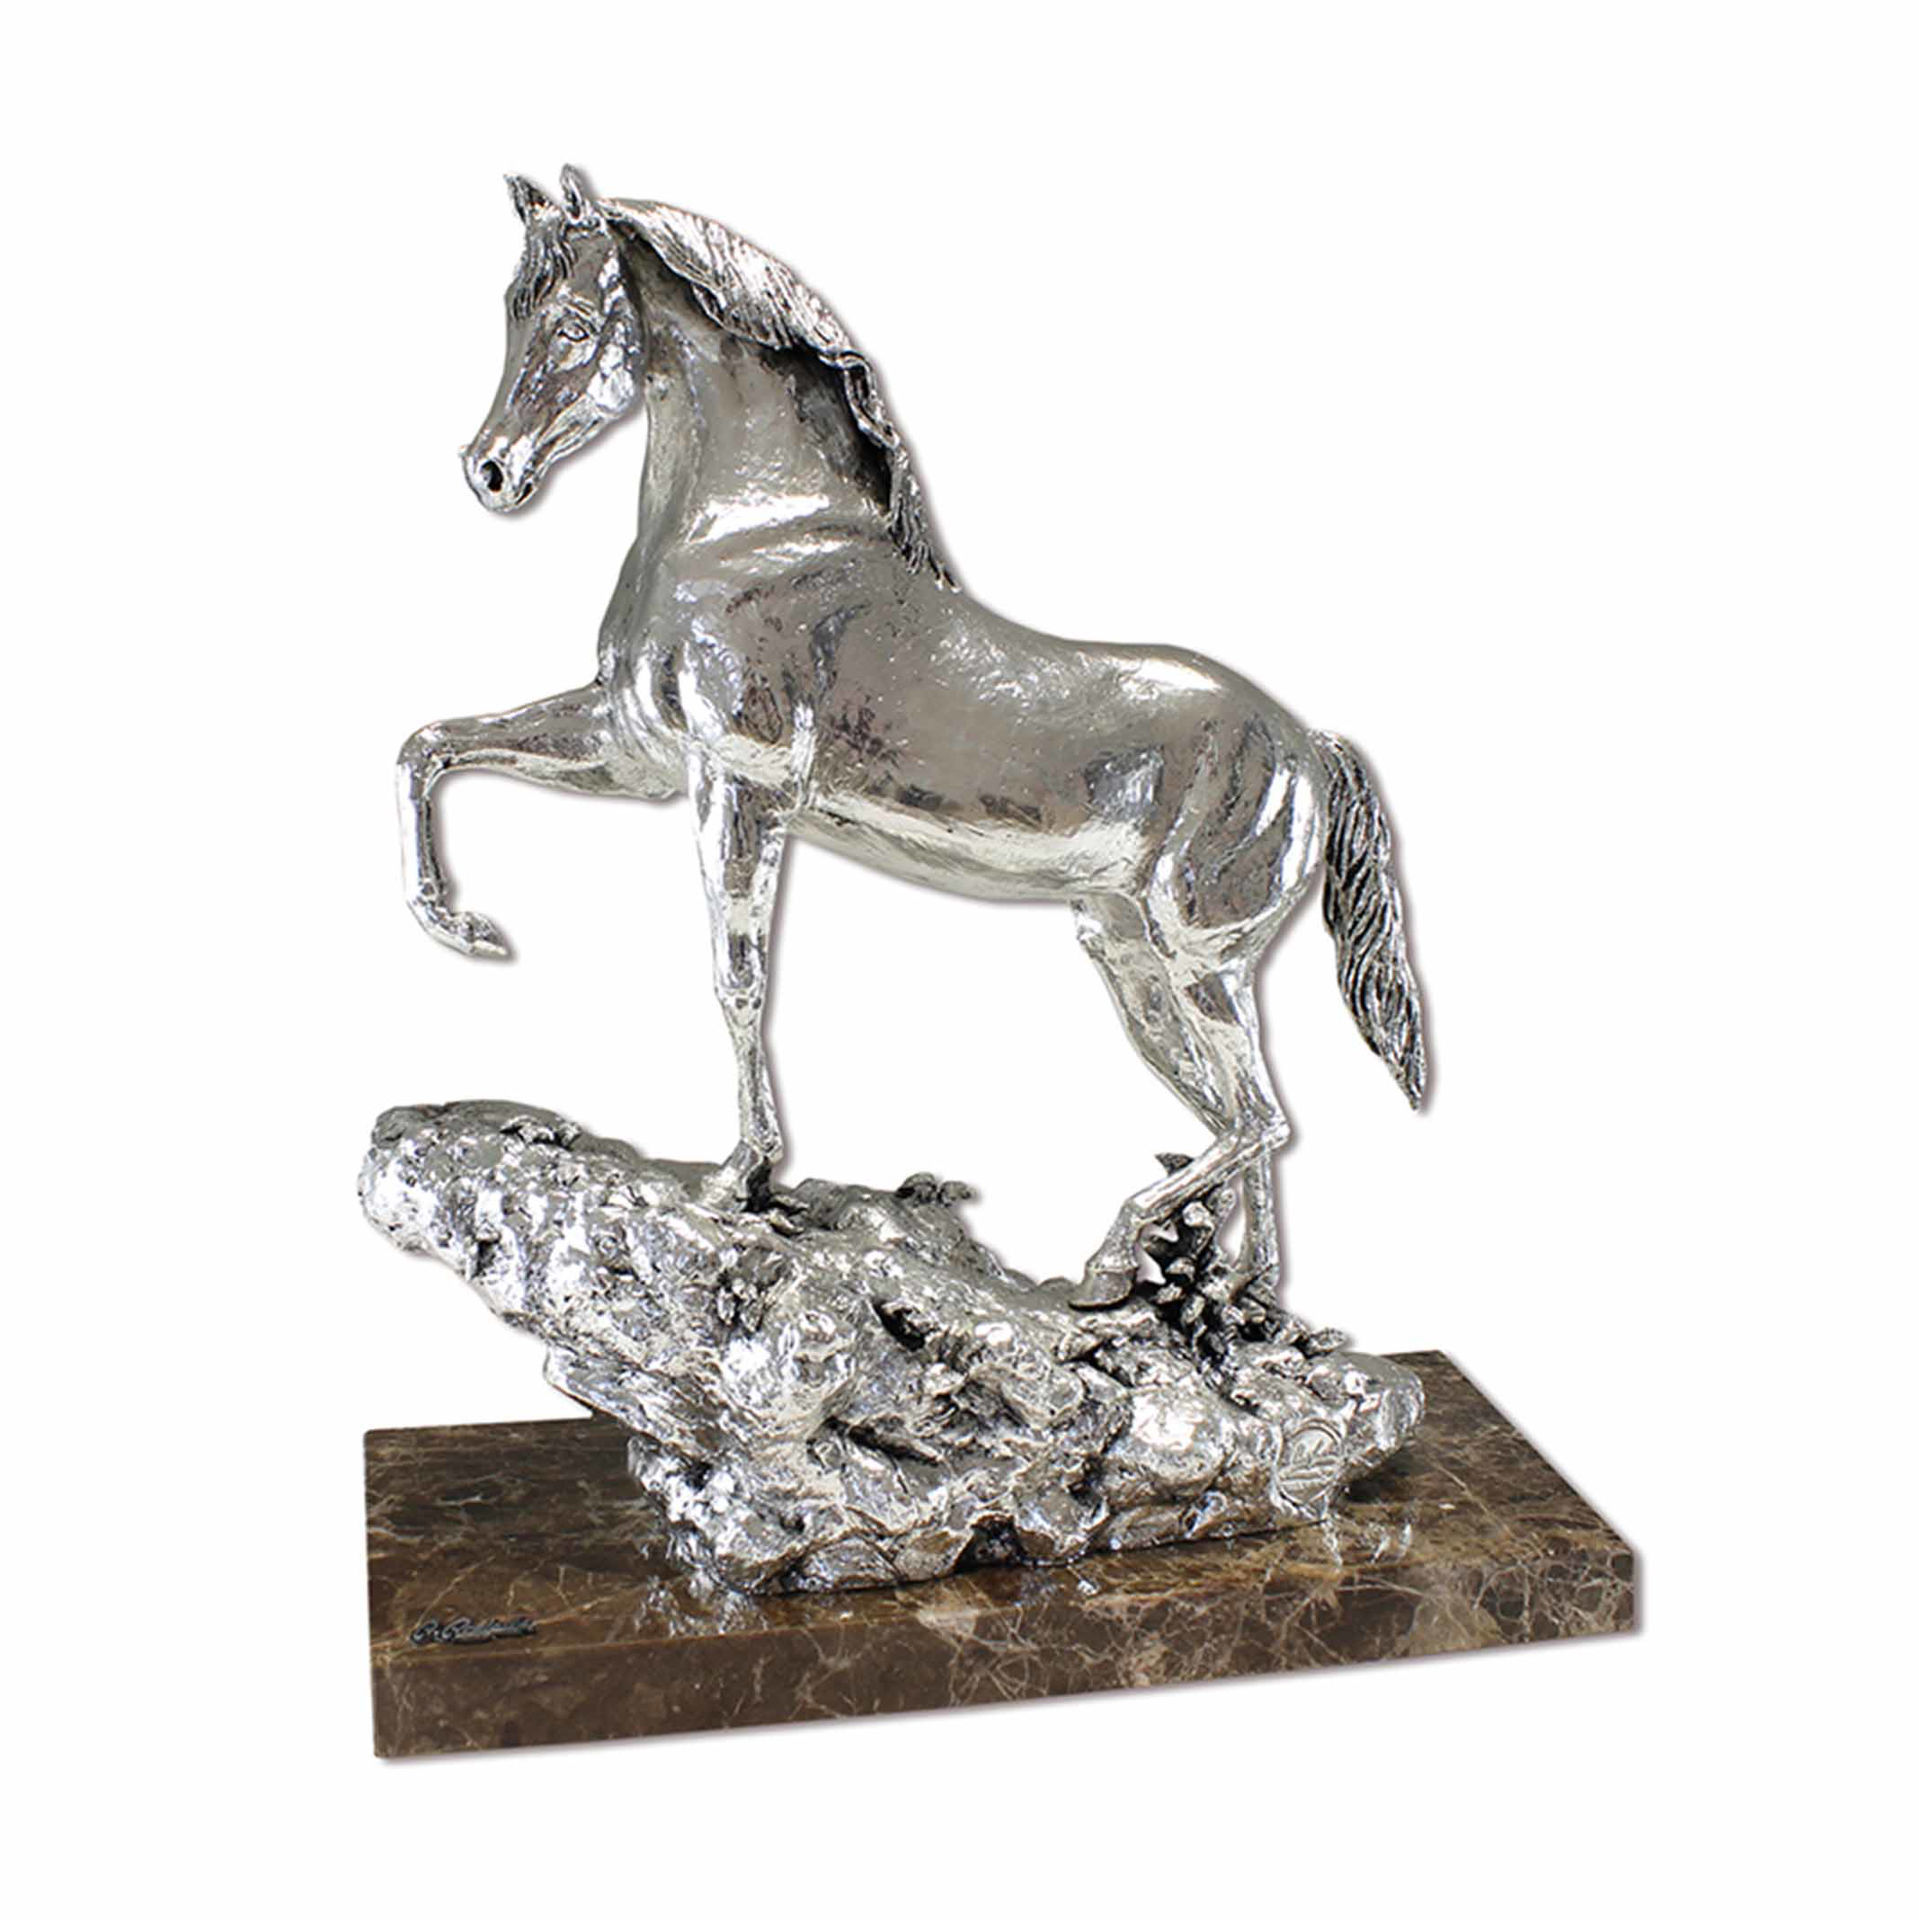 Picture of Arabian Horse Sculpture Silver